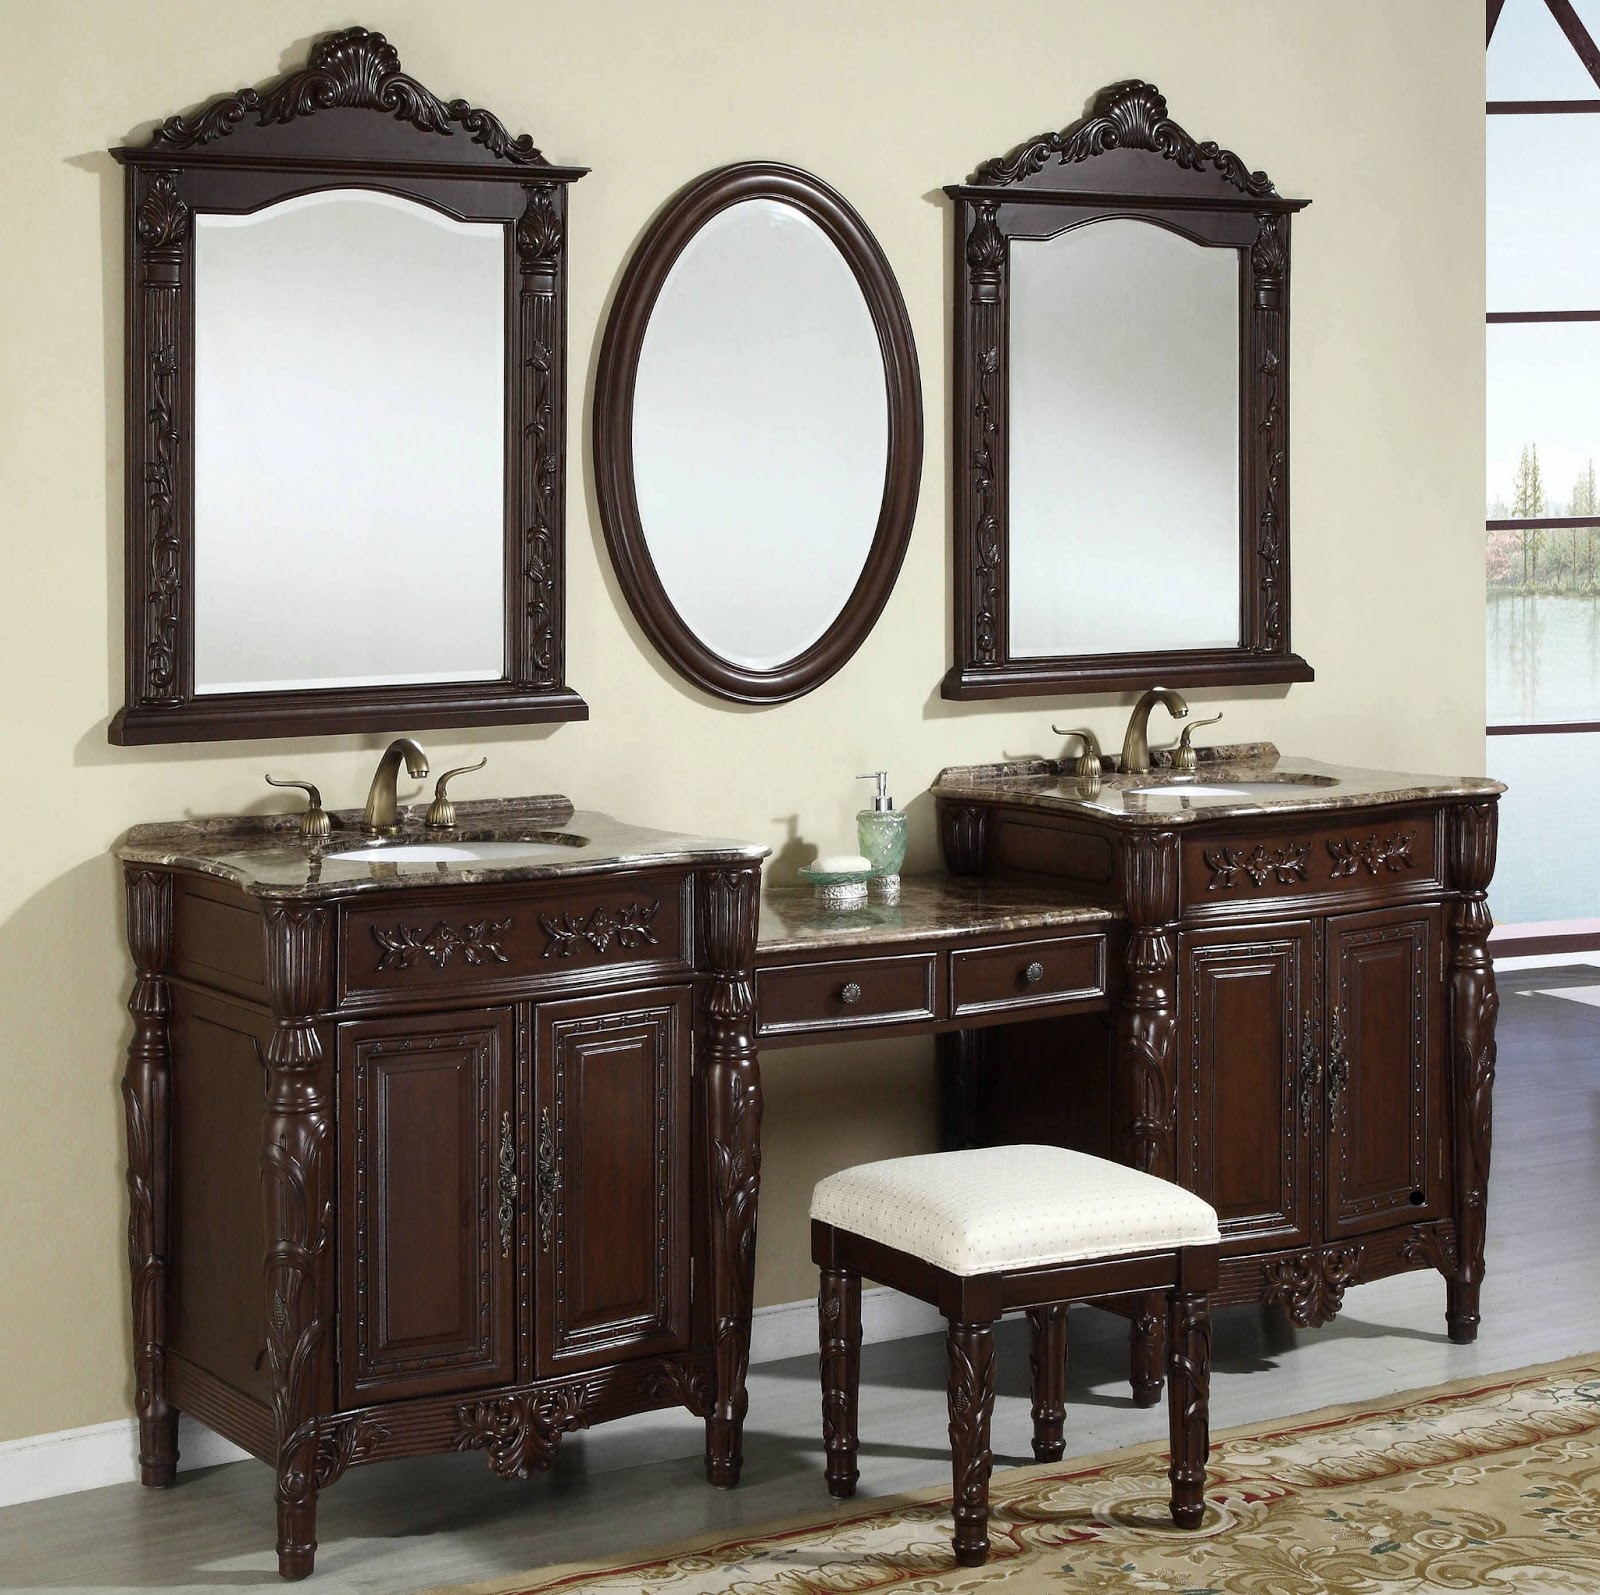 Bathroom Vanity Mirrors Models and Buying Tips